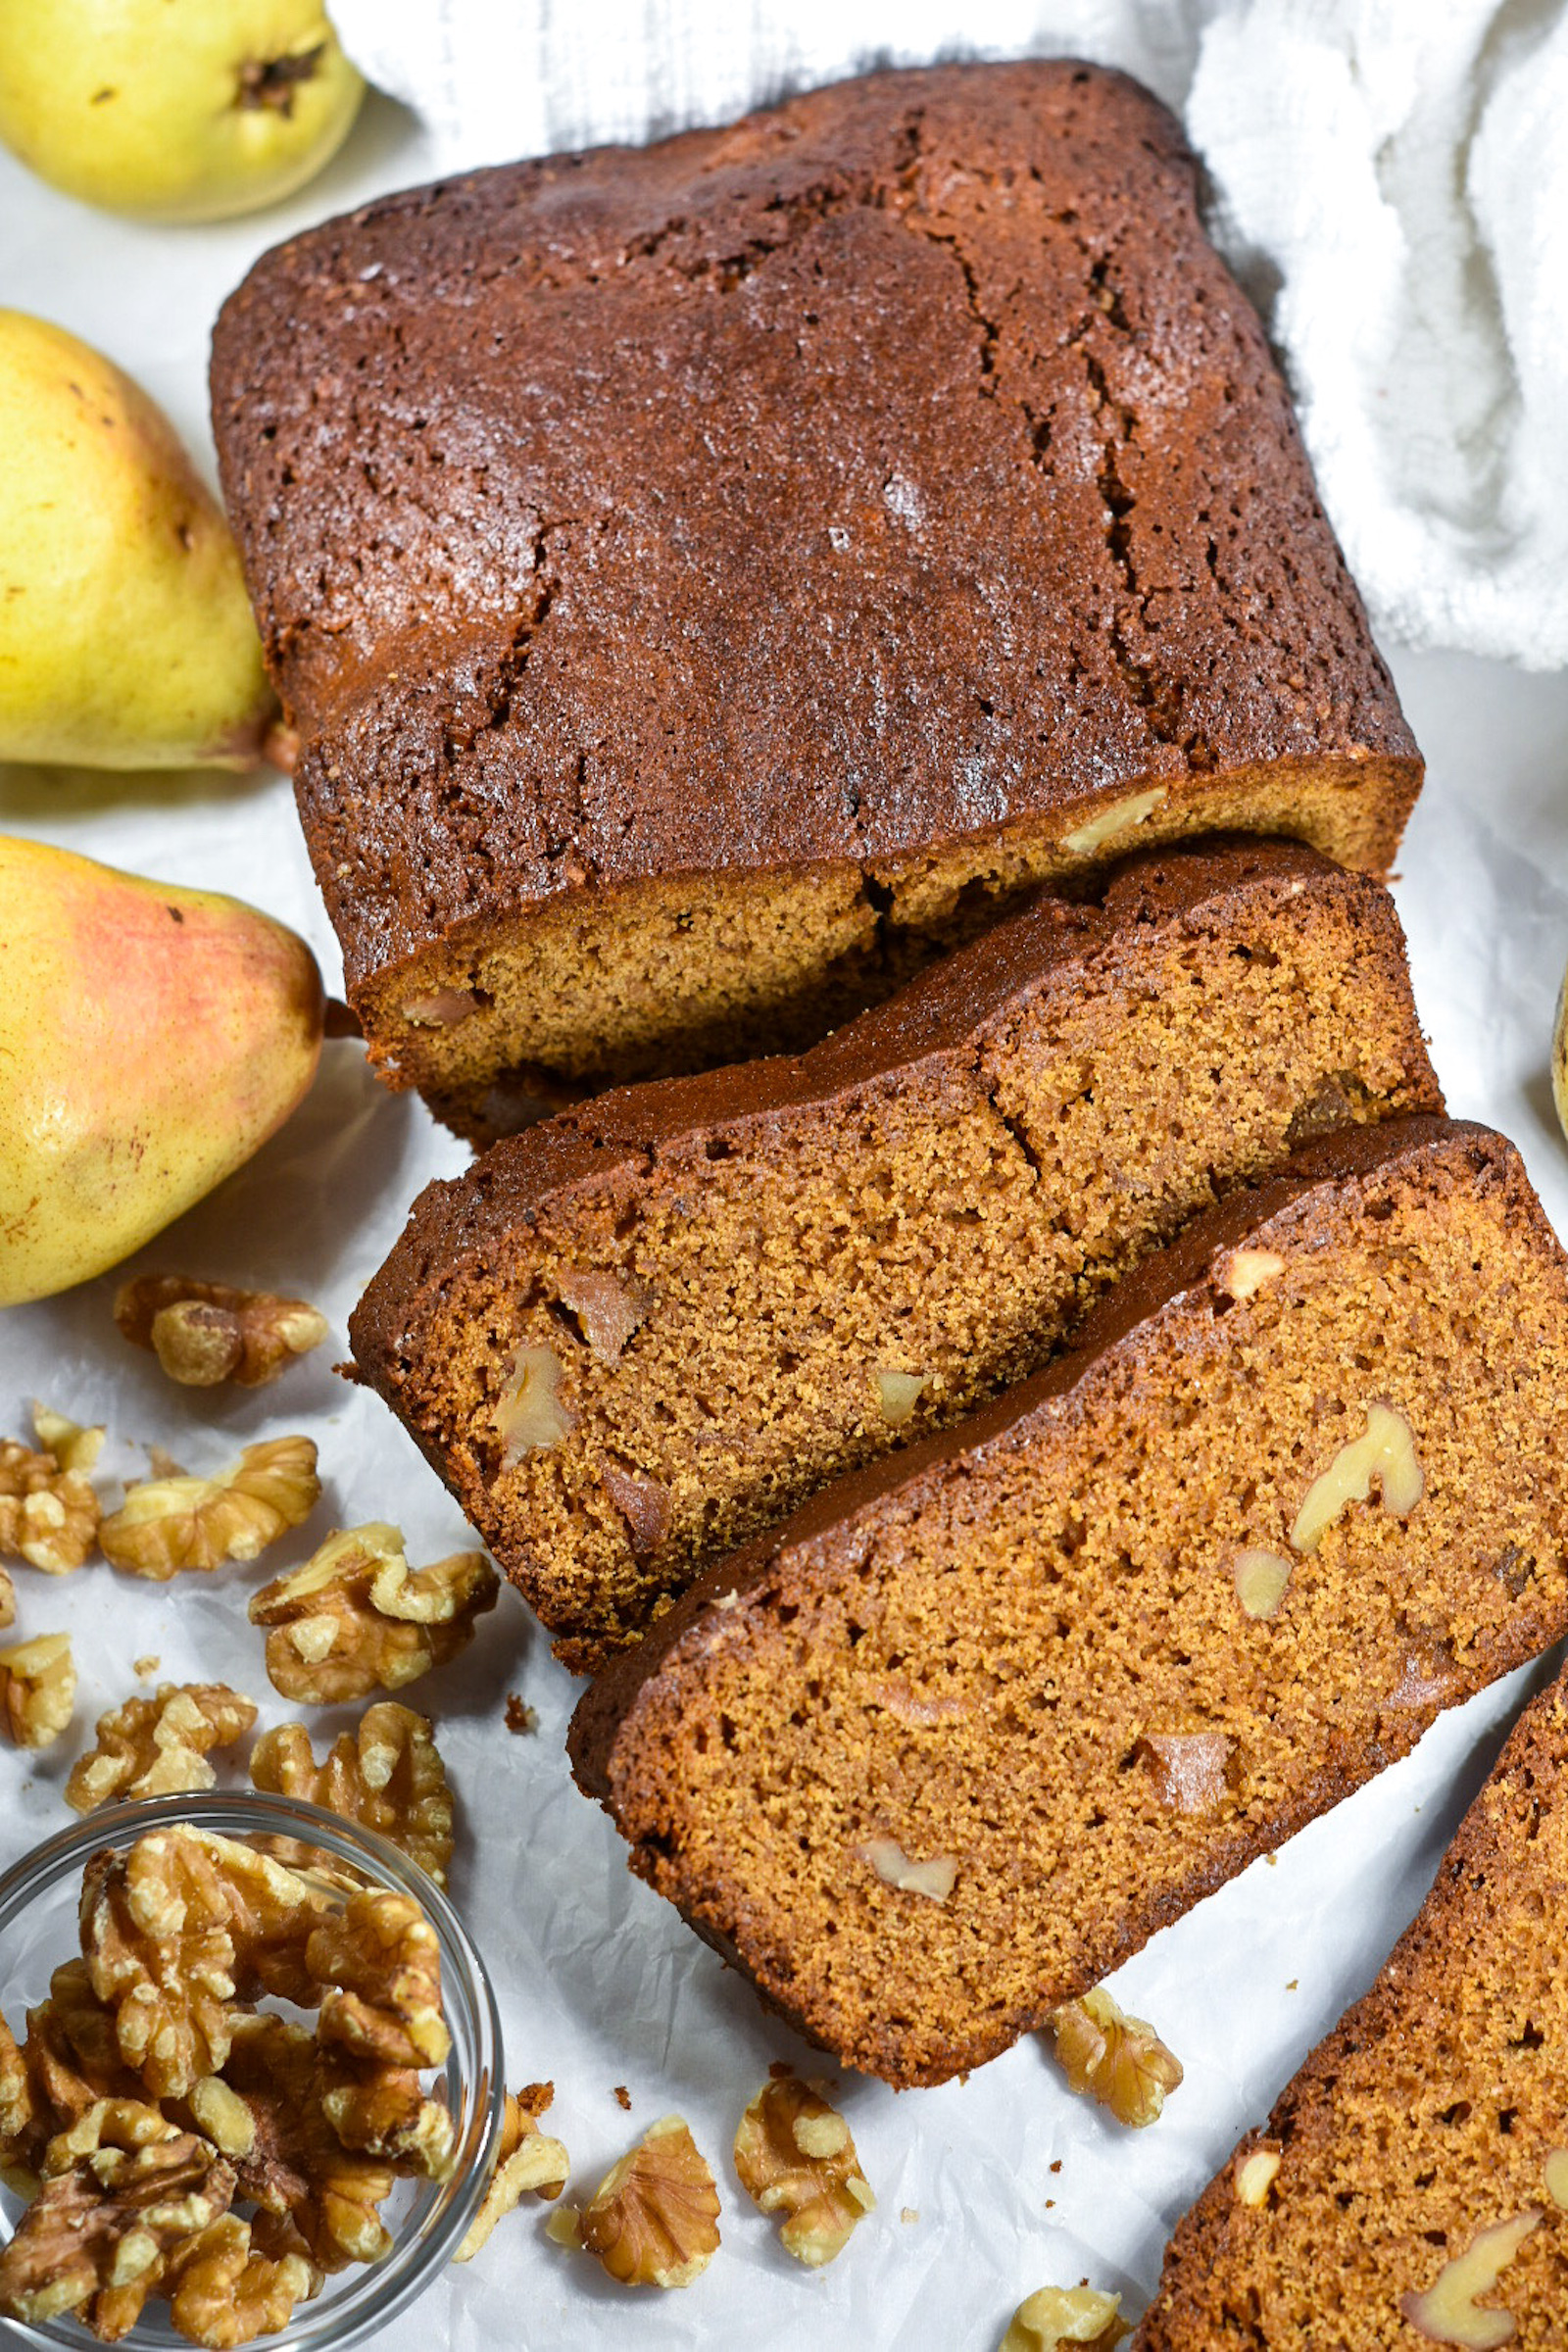 Gingerbread Loaf with Walnuts and Caramelised Pears, alongside whole pears and a bowl of walnuts, on a white background